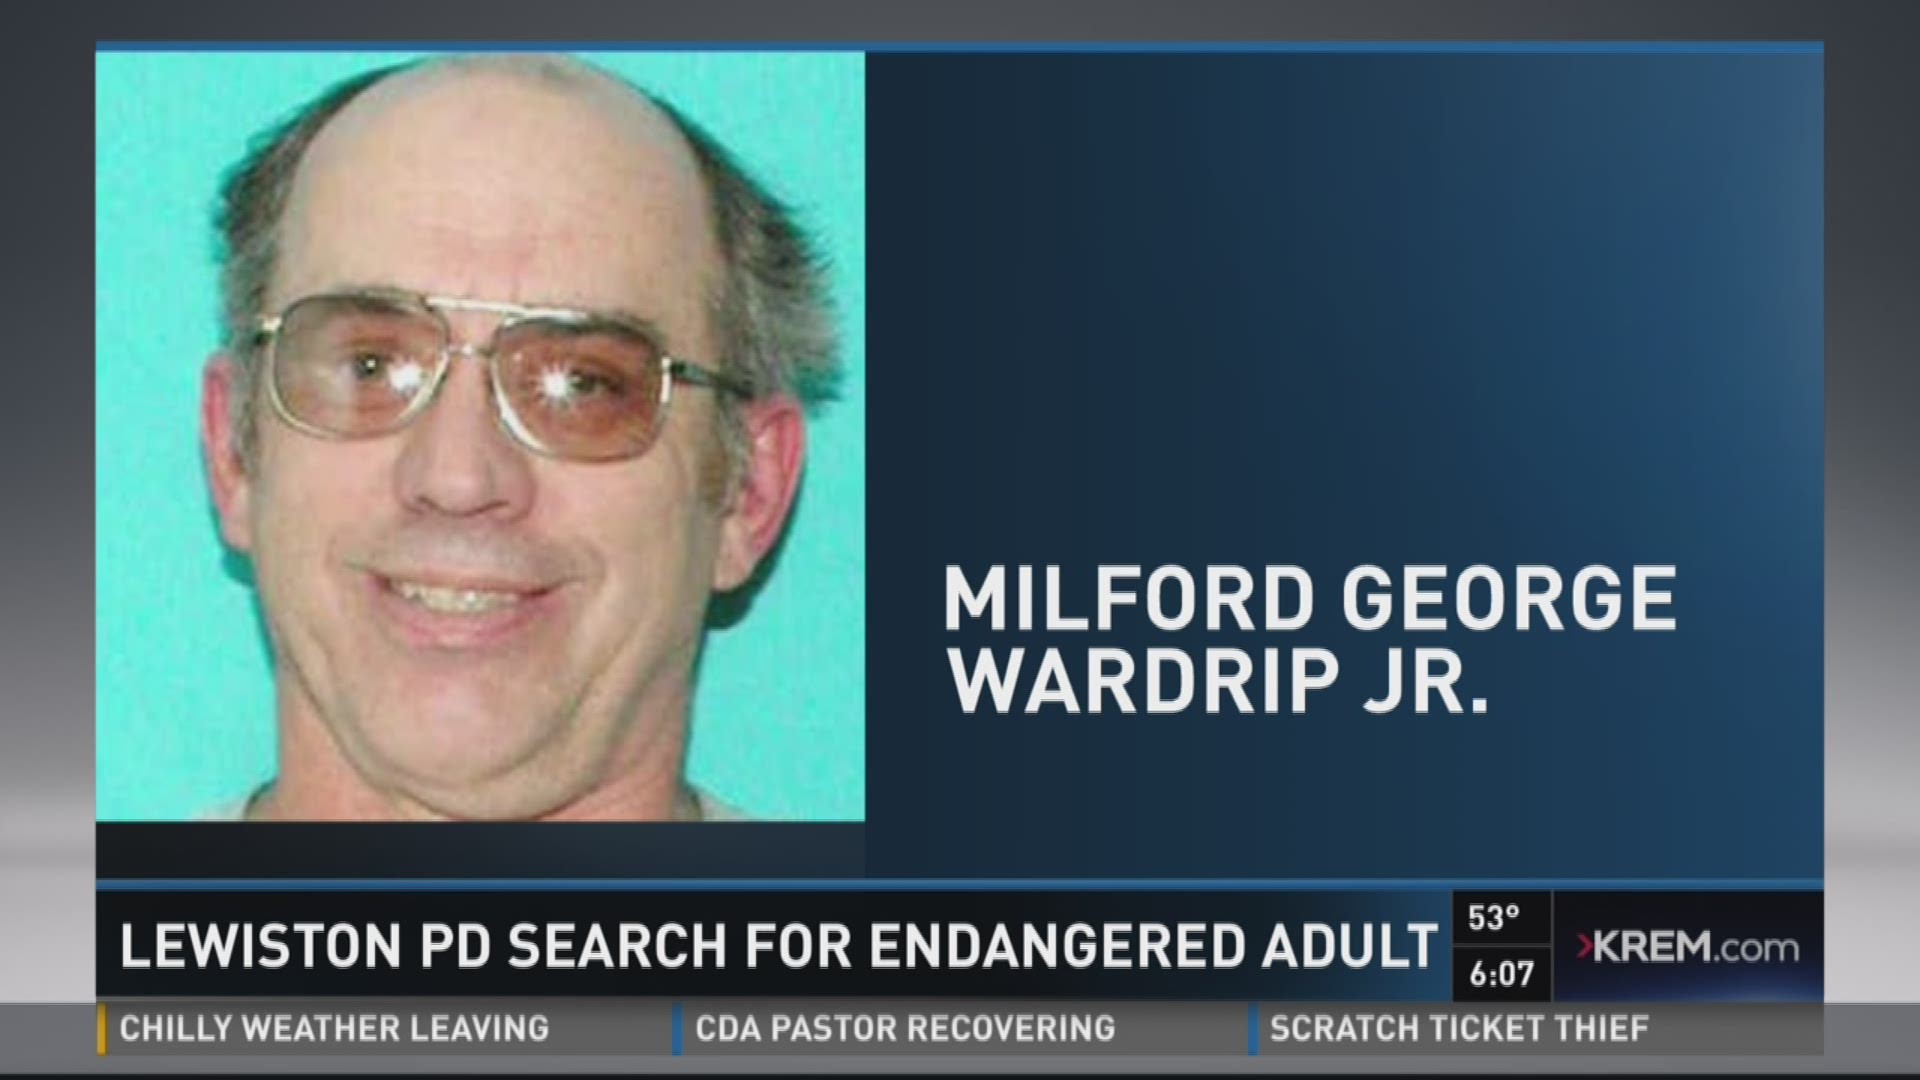 Lewiston PD search for endangered adult